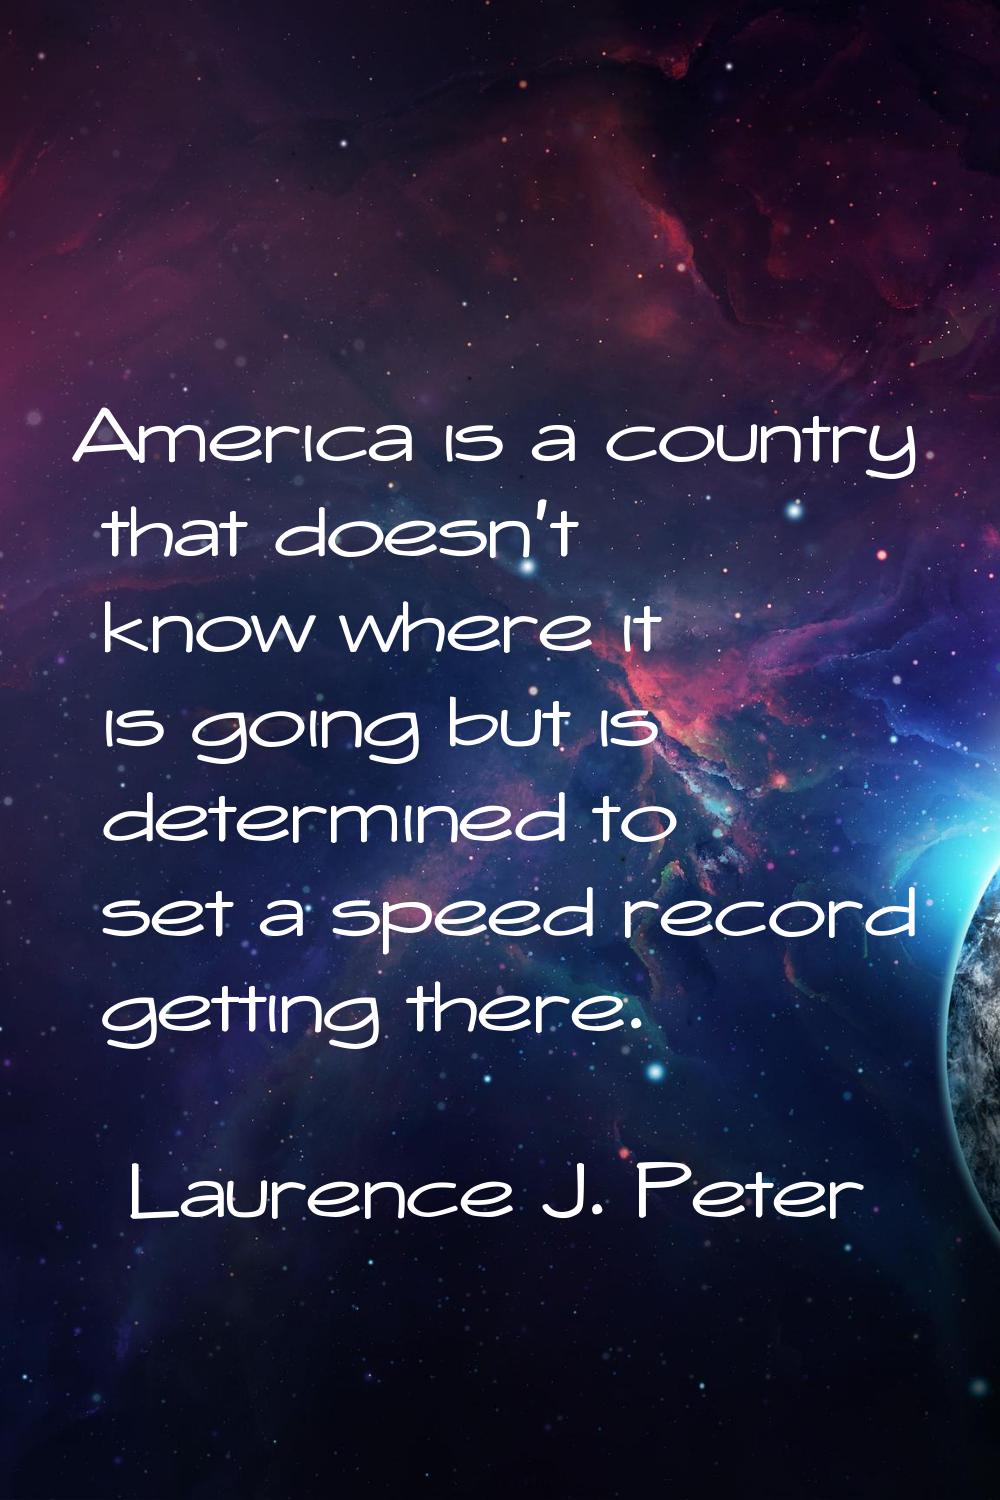 America is a country that doesn't know where it is going but is determined to set a speed record ge